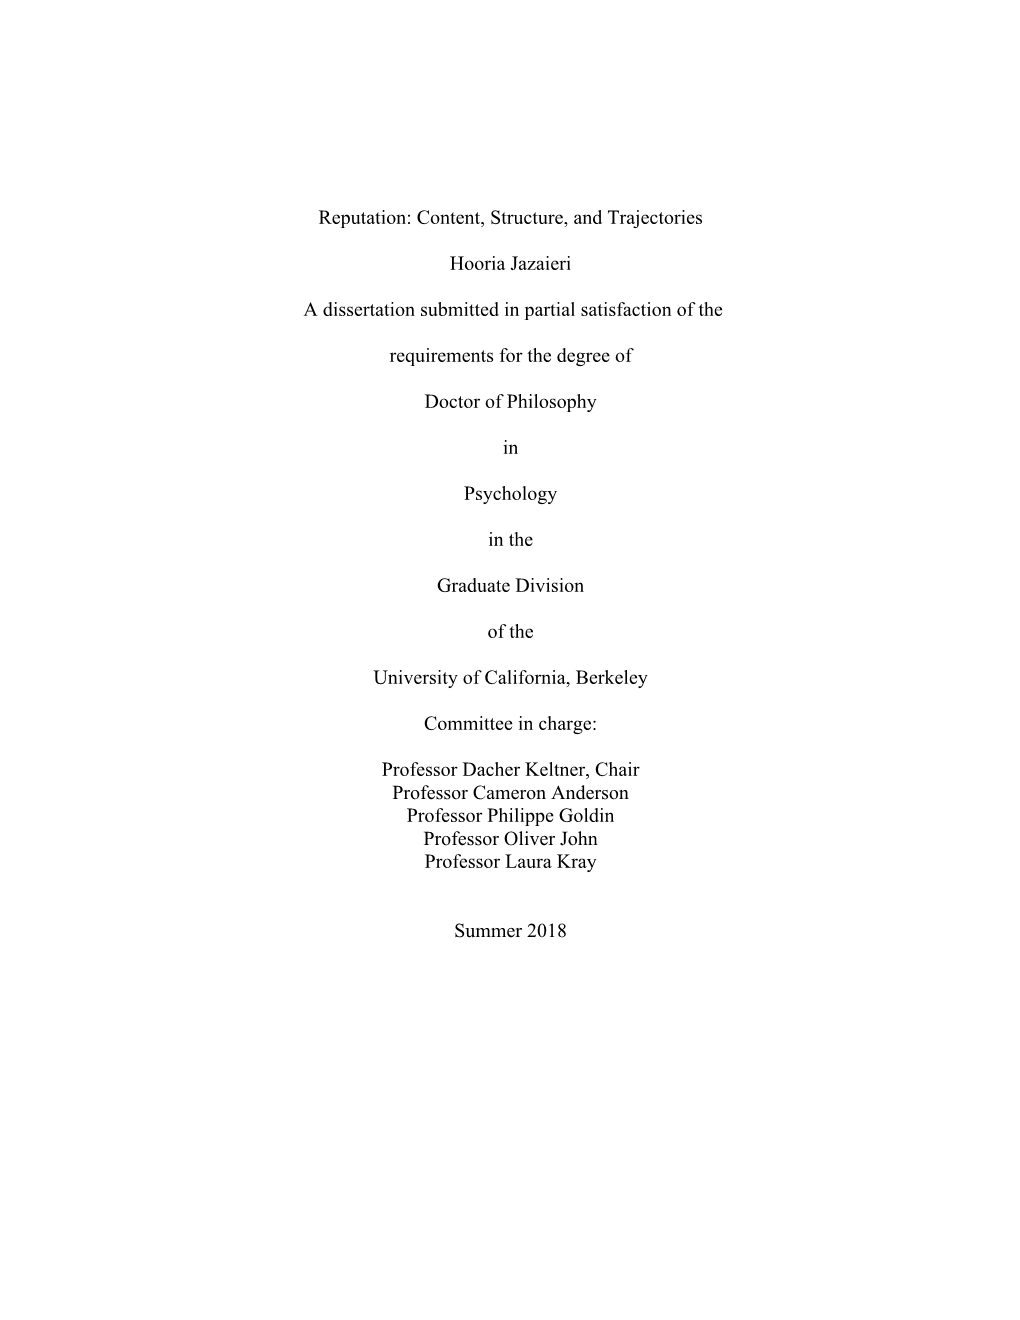 Reputation: Content, Structure, and Trajectories Hooria Jazaieri a Dissertation Submitted in Partial Satisfaction of the Requir